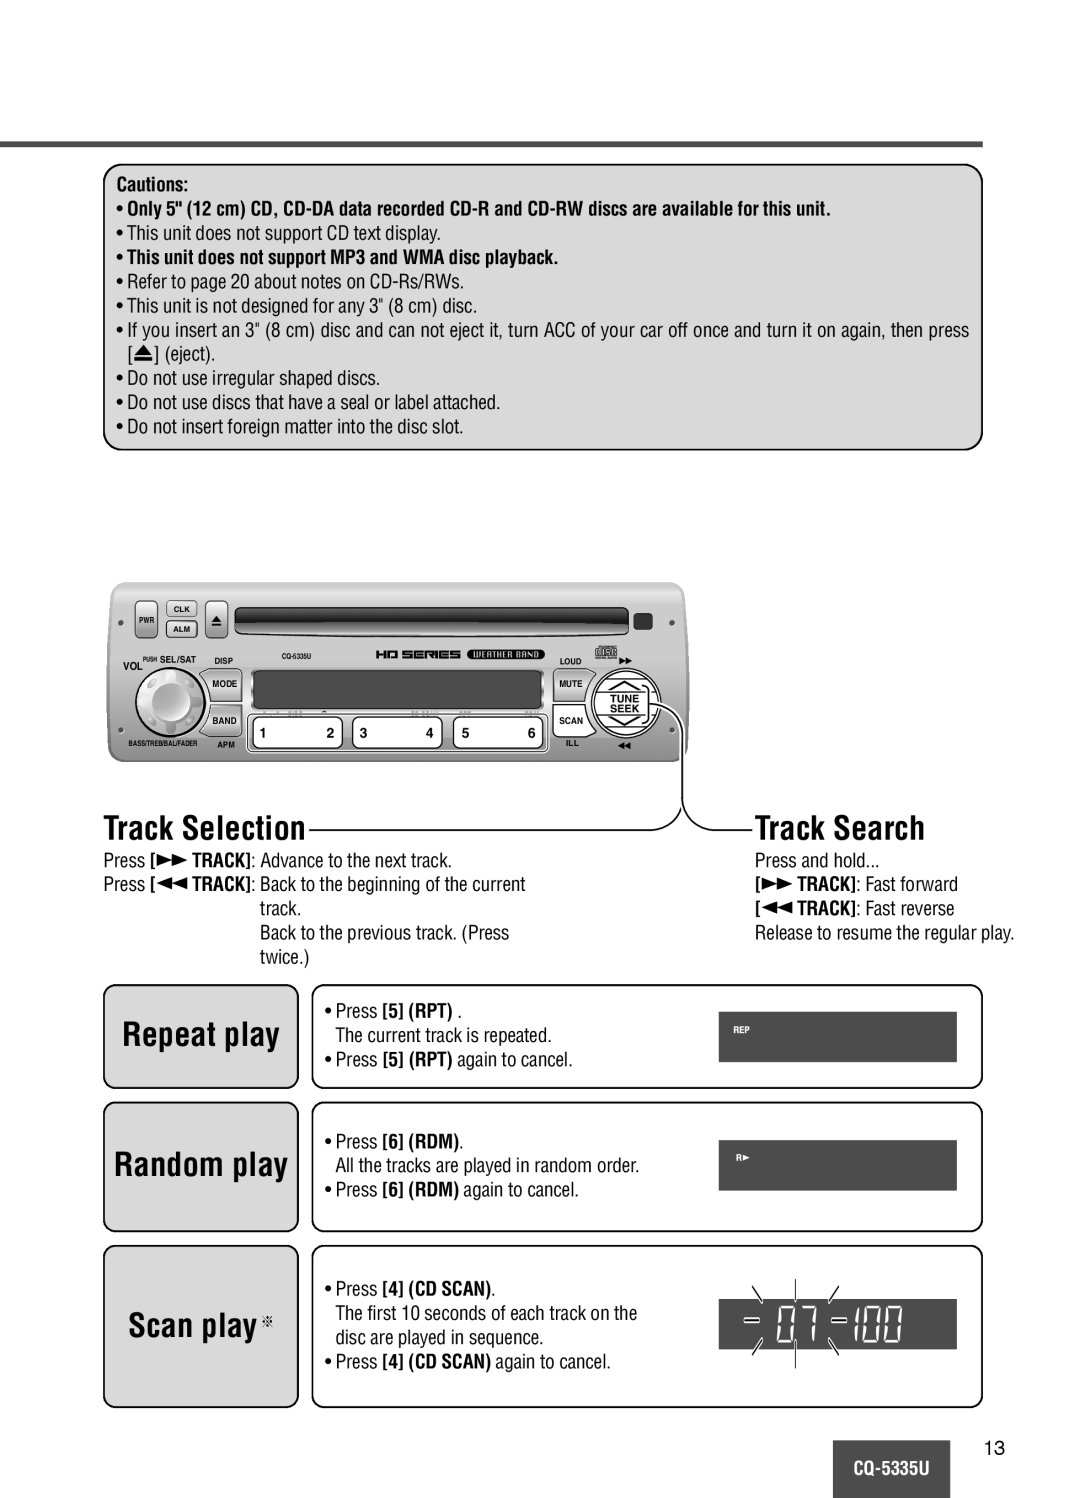 Panasonic CQ-5335U operating instructions Track Selection, Track Search, Repeat play Random play Scan play 